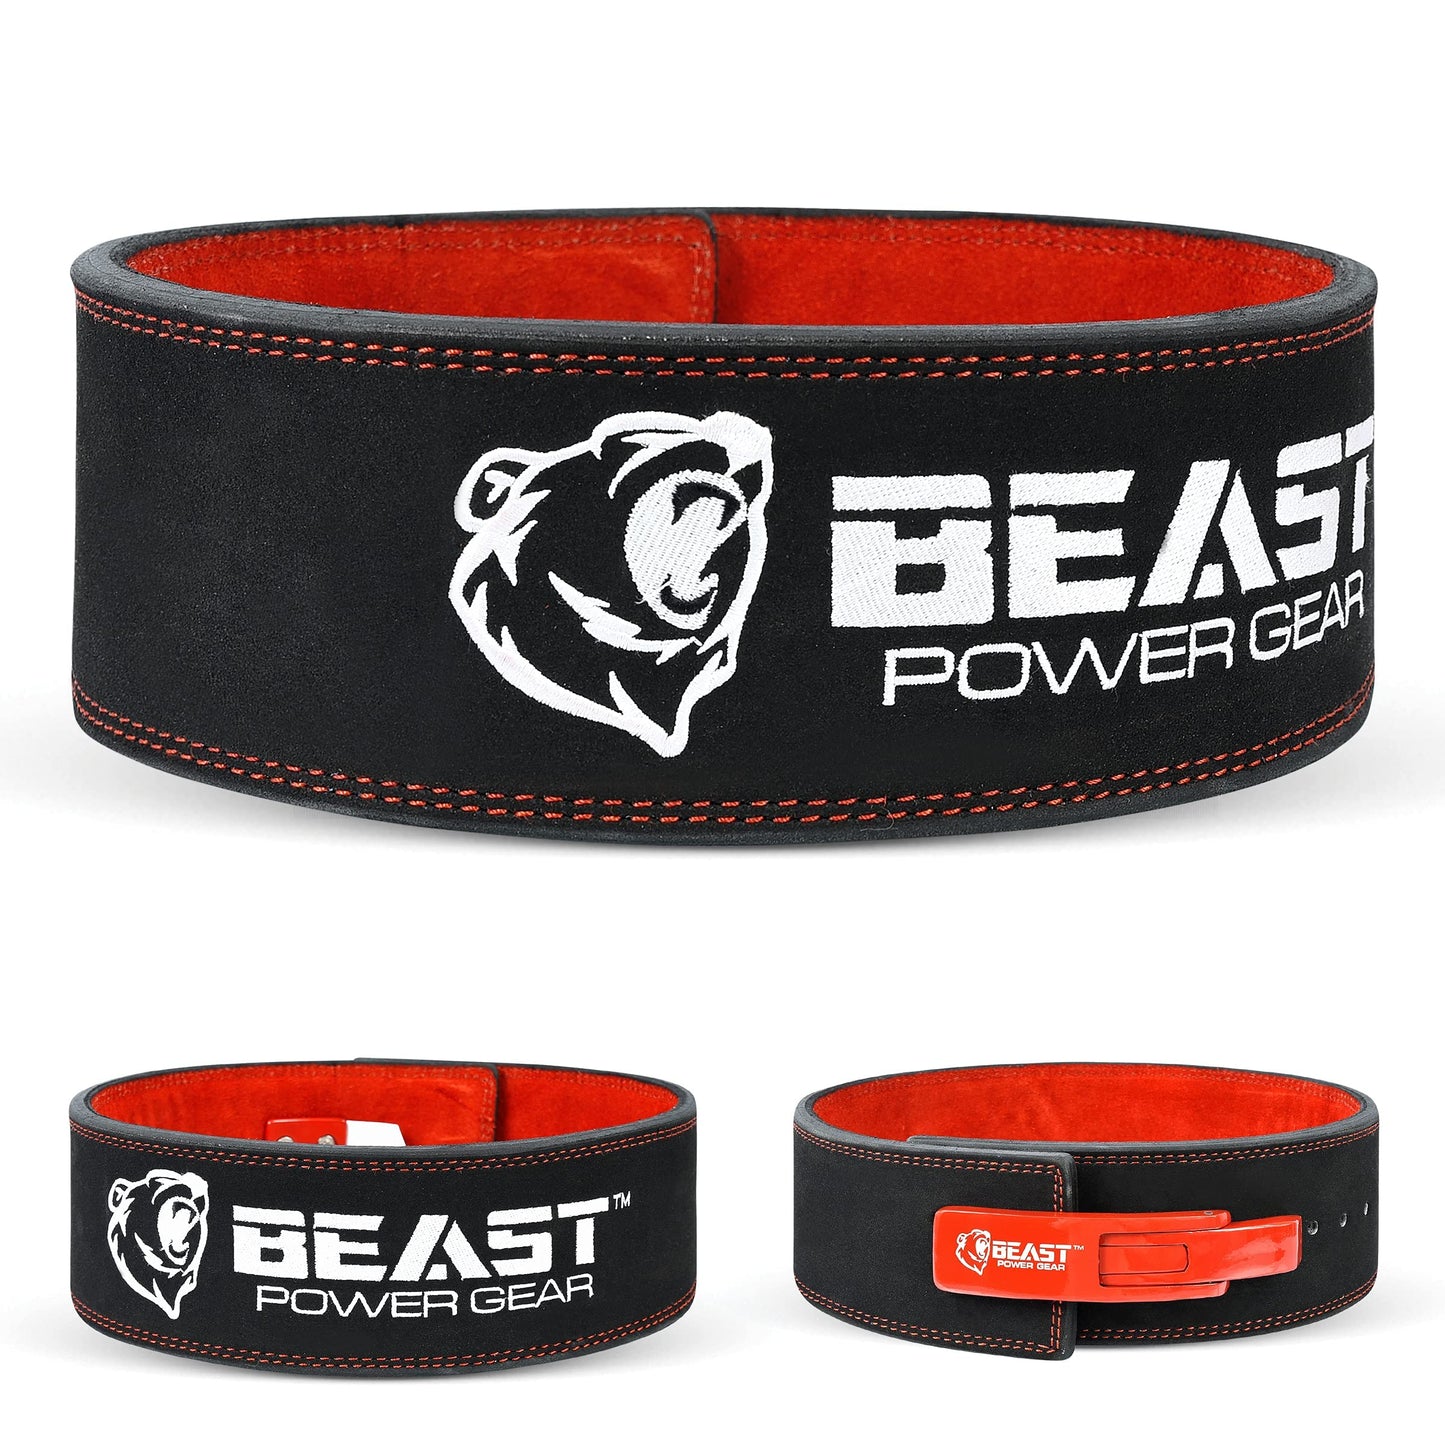 Beastpowergear Weight Lifting Belt with Lever Buckle|10MM Thick & 4 Inches Wide|Free Strap- Advanced Back Support for Weightlifting, Powerlifting, Deadlifts, Squats - Men & Women